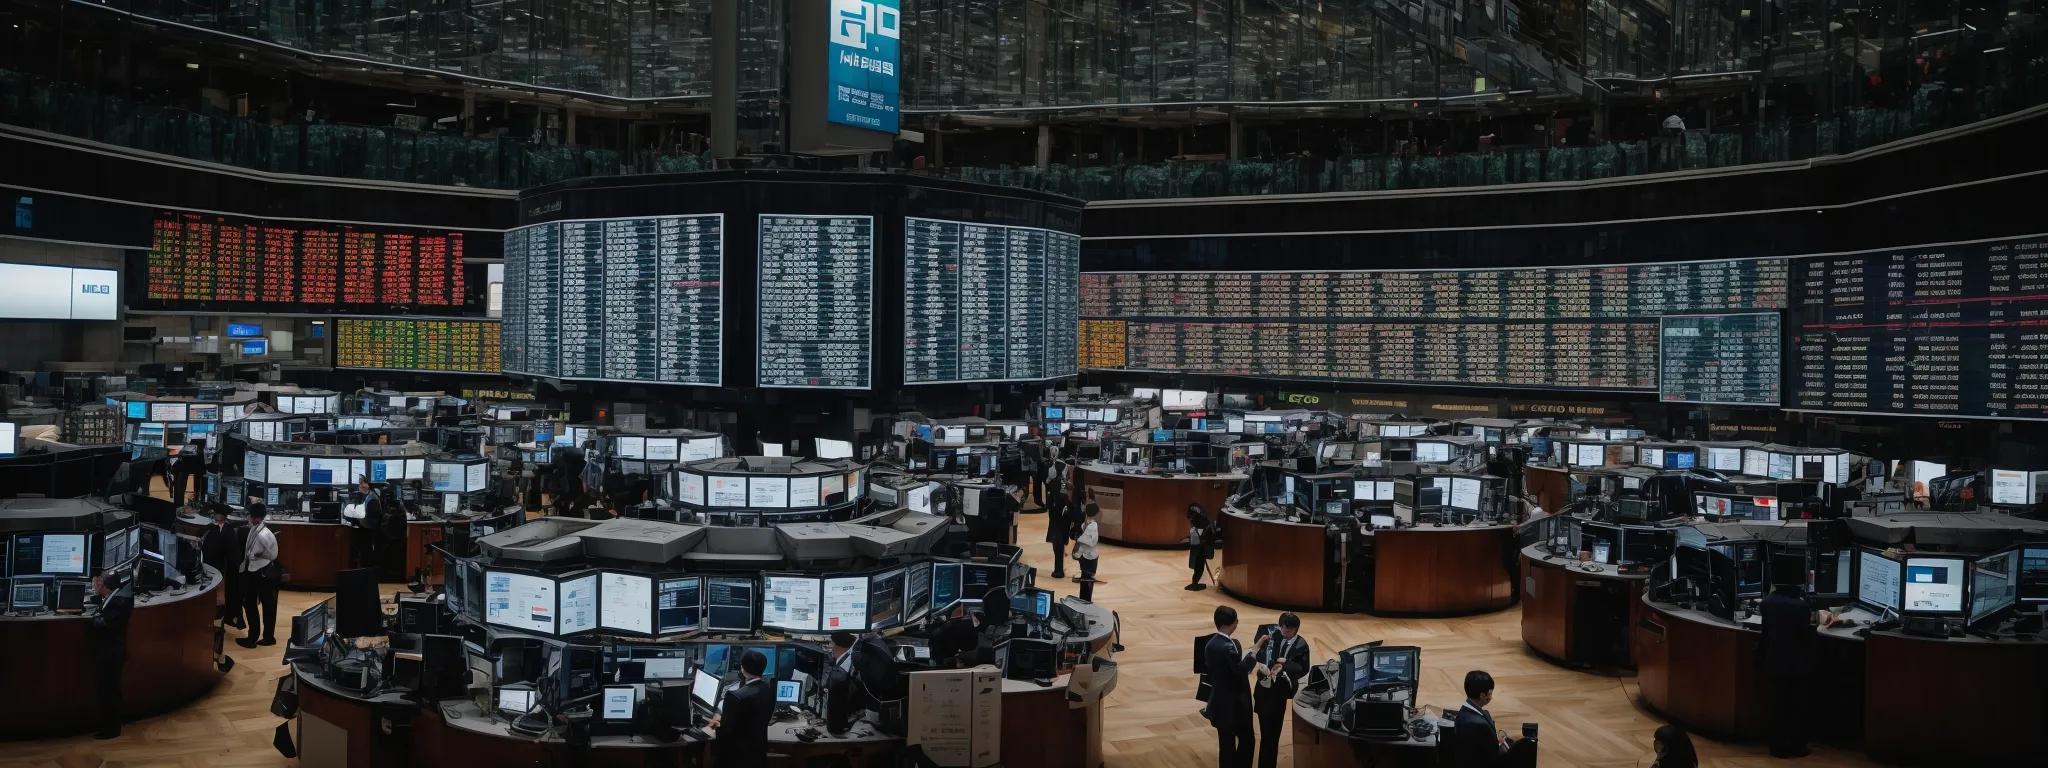 a bustling stock exchange floor with screens displaying international market data.